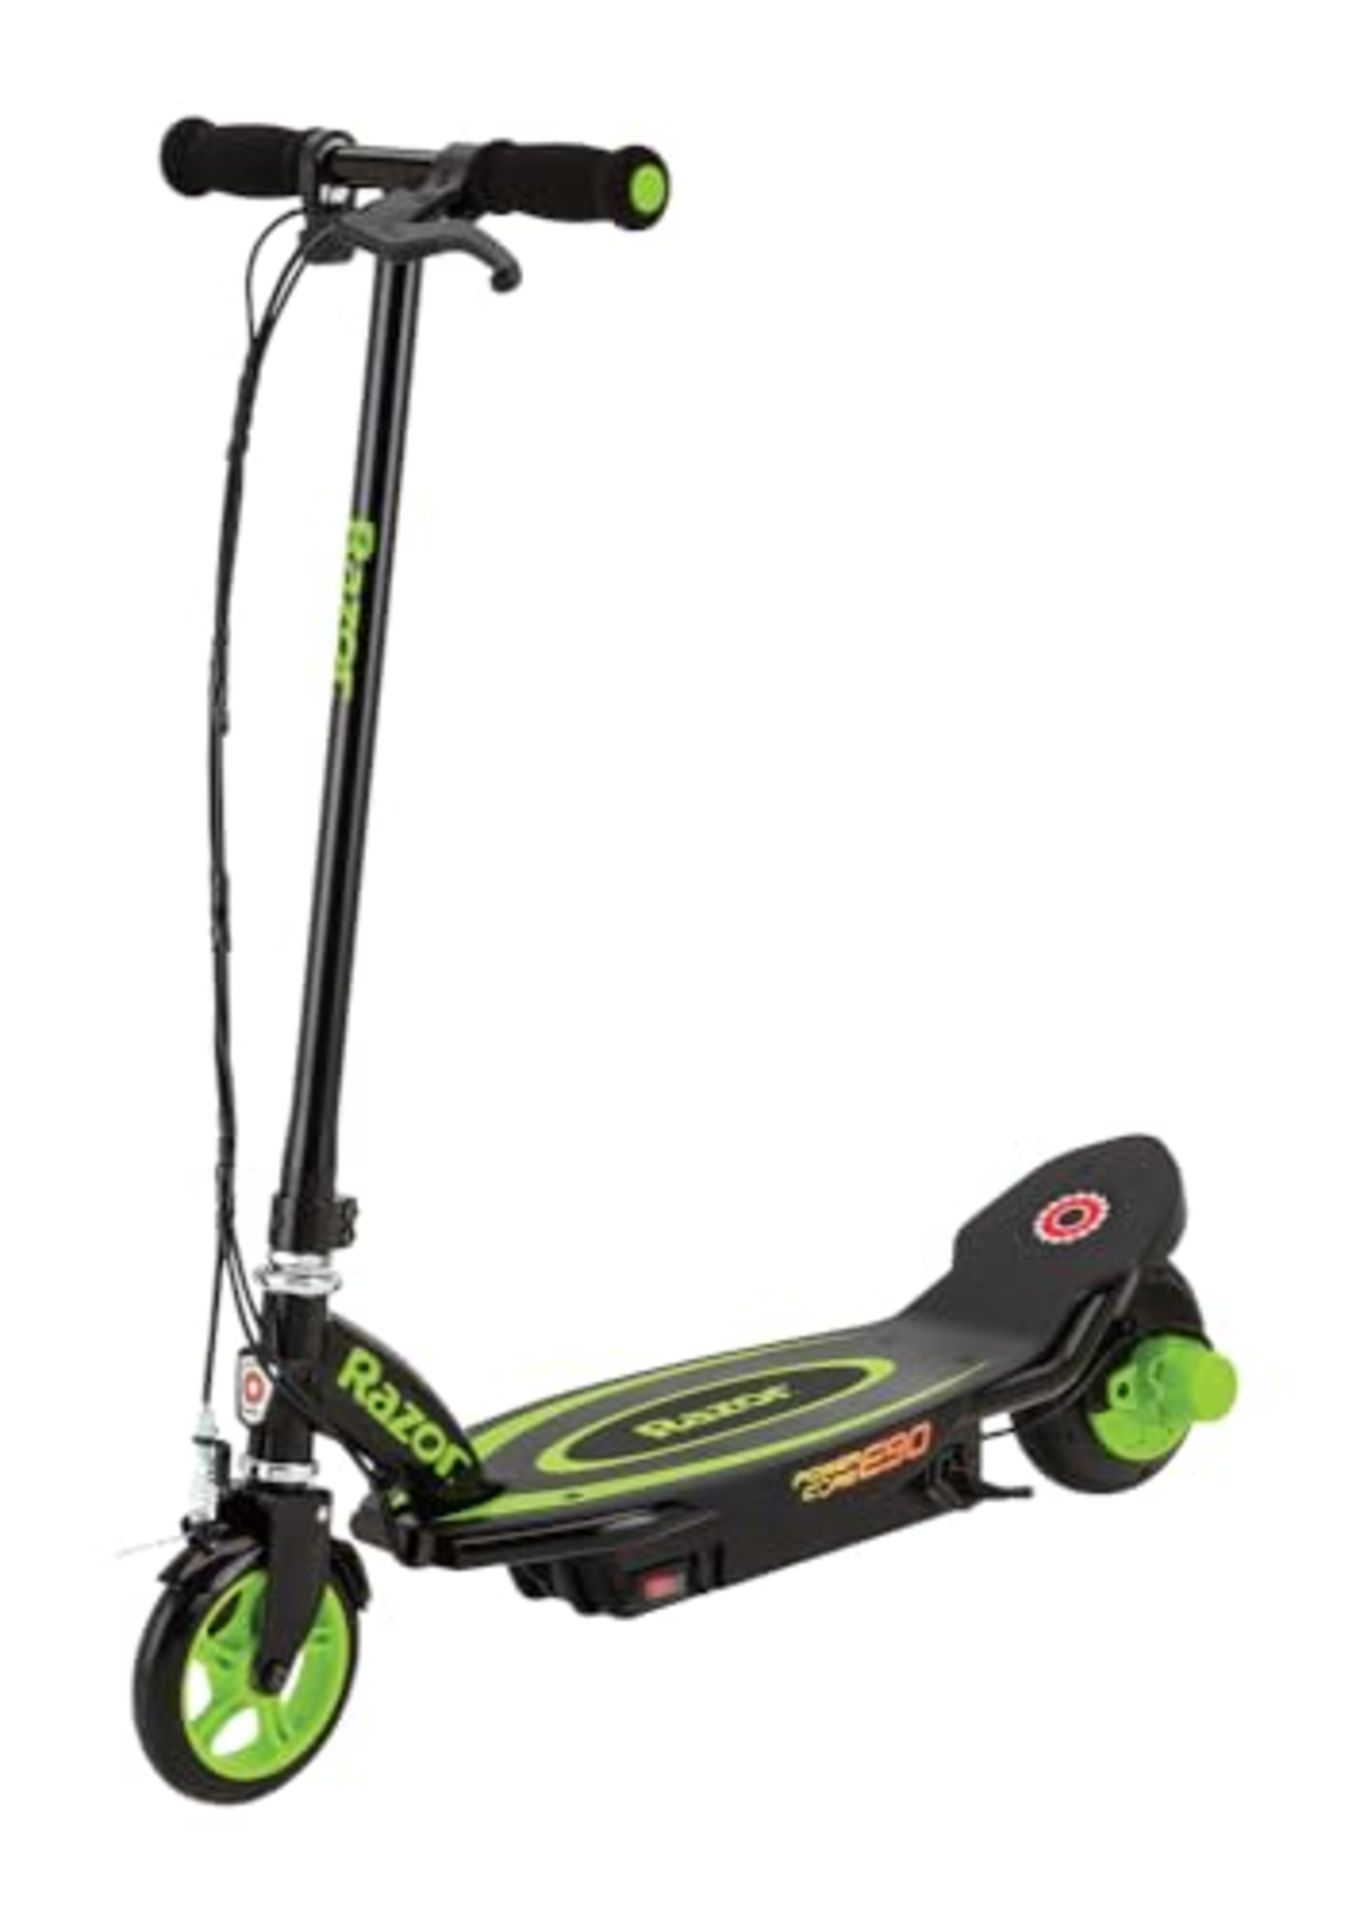 RRP £170.00 Razor Children's - Green Razor Powercore E90 Scooter, Green [ without charger ]